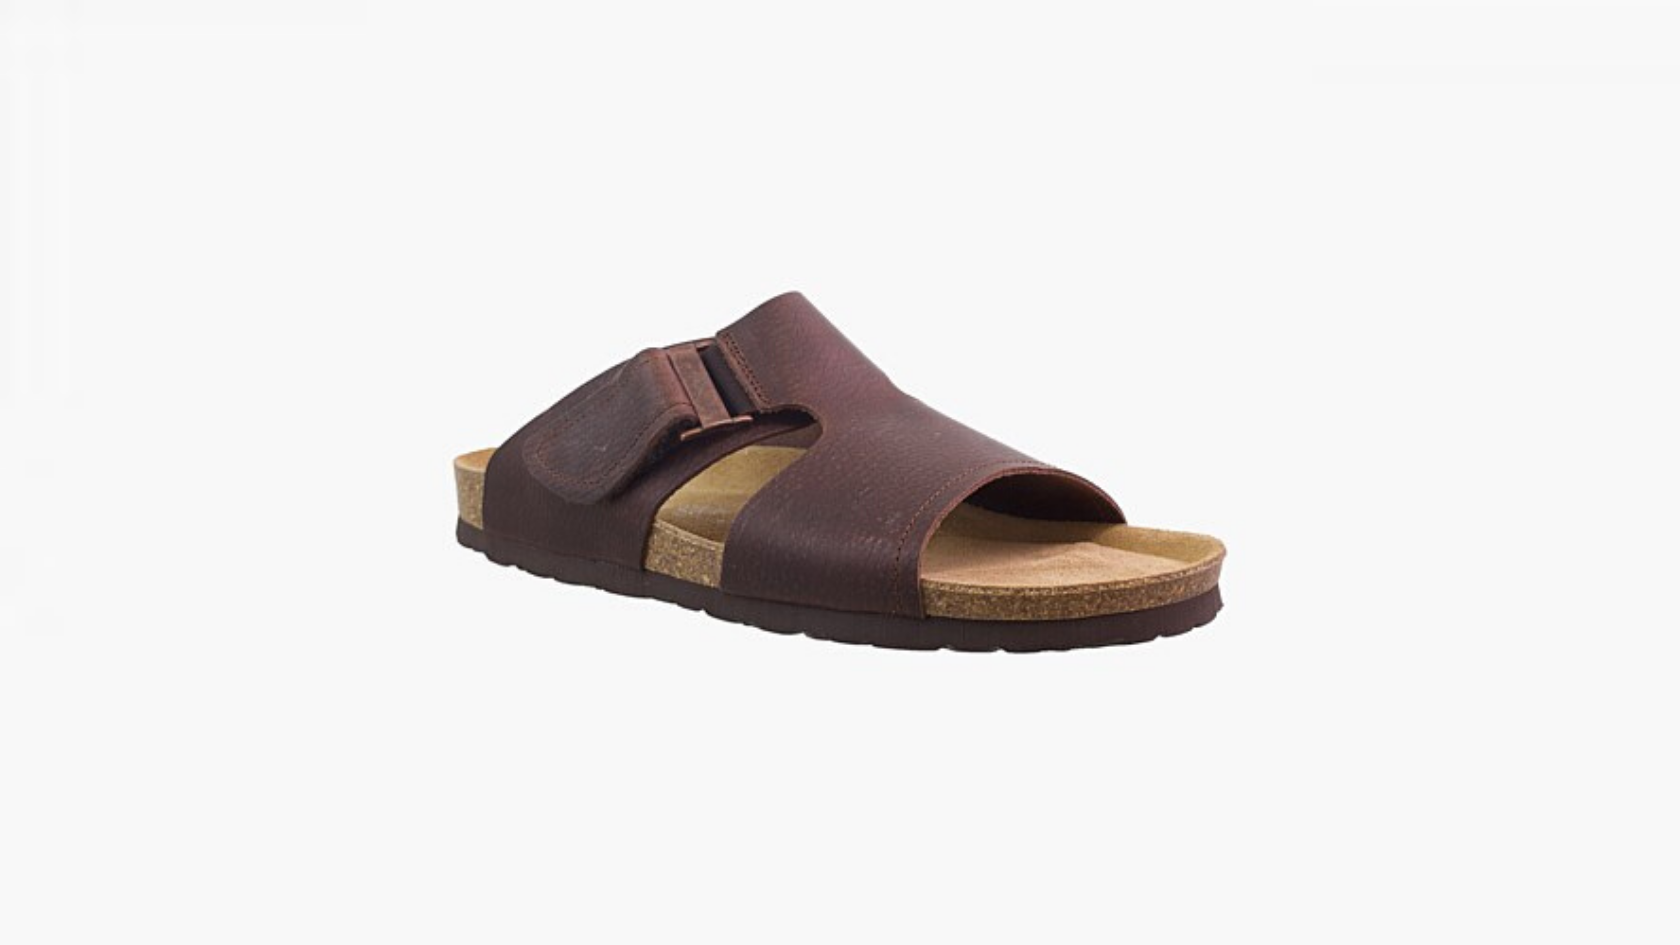 Single brown Silver Lining Quentin sandals on an angle  against a neutral background